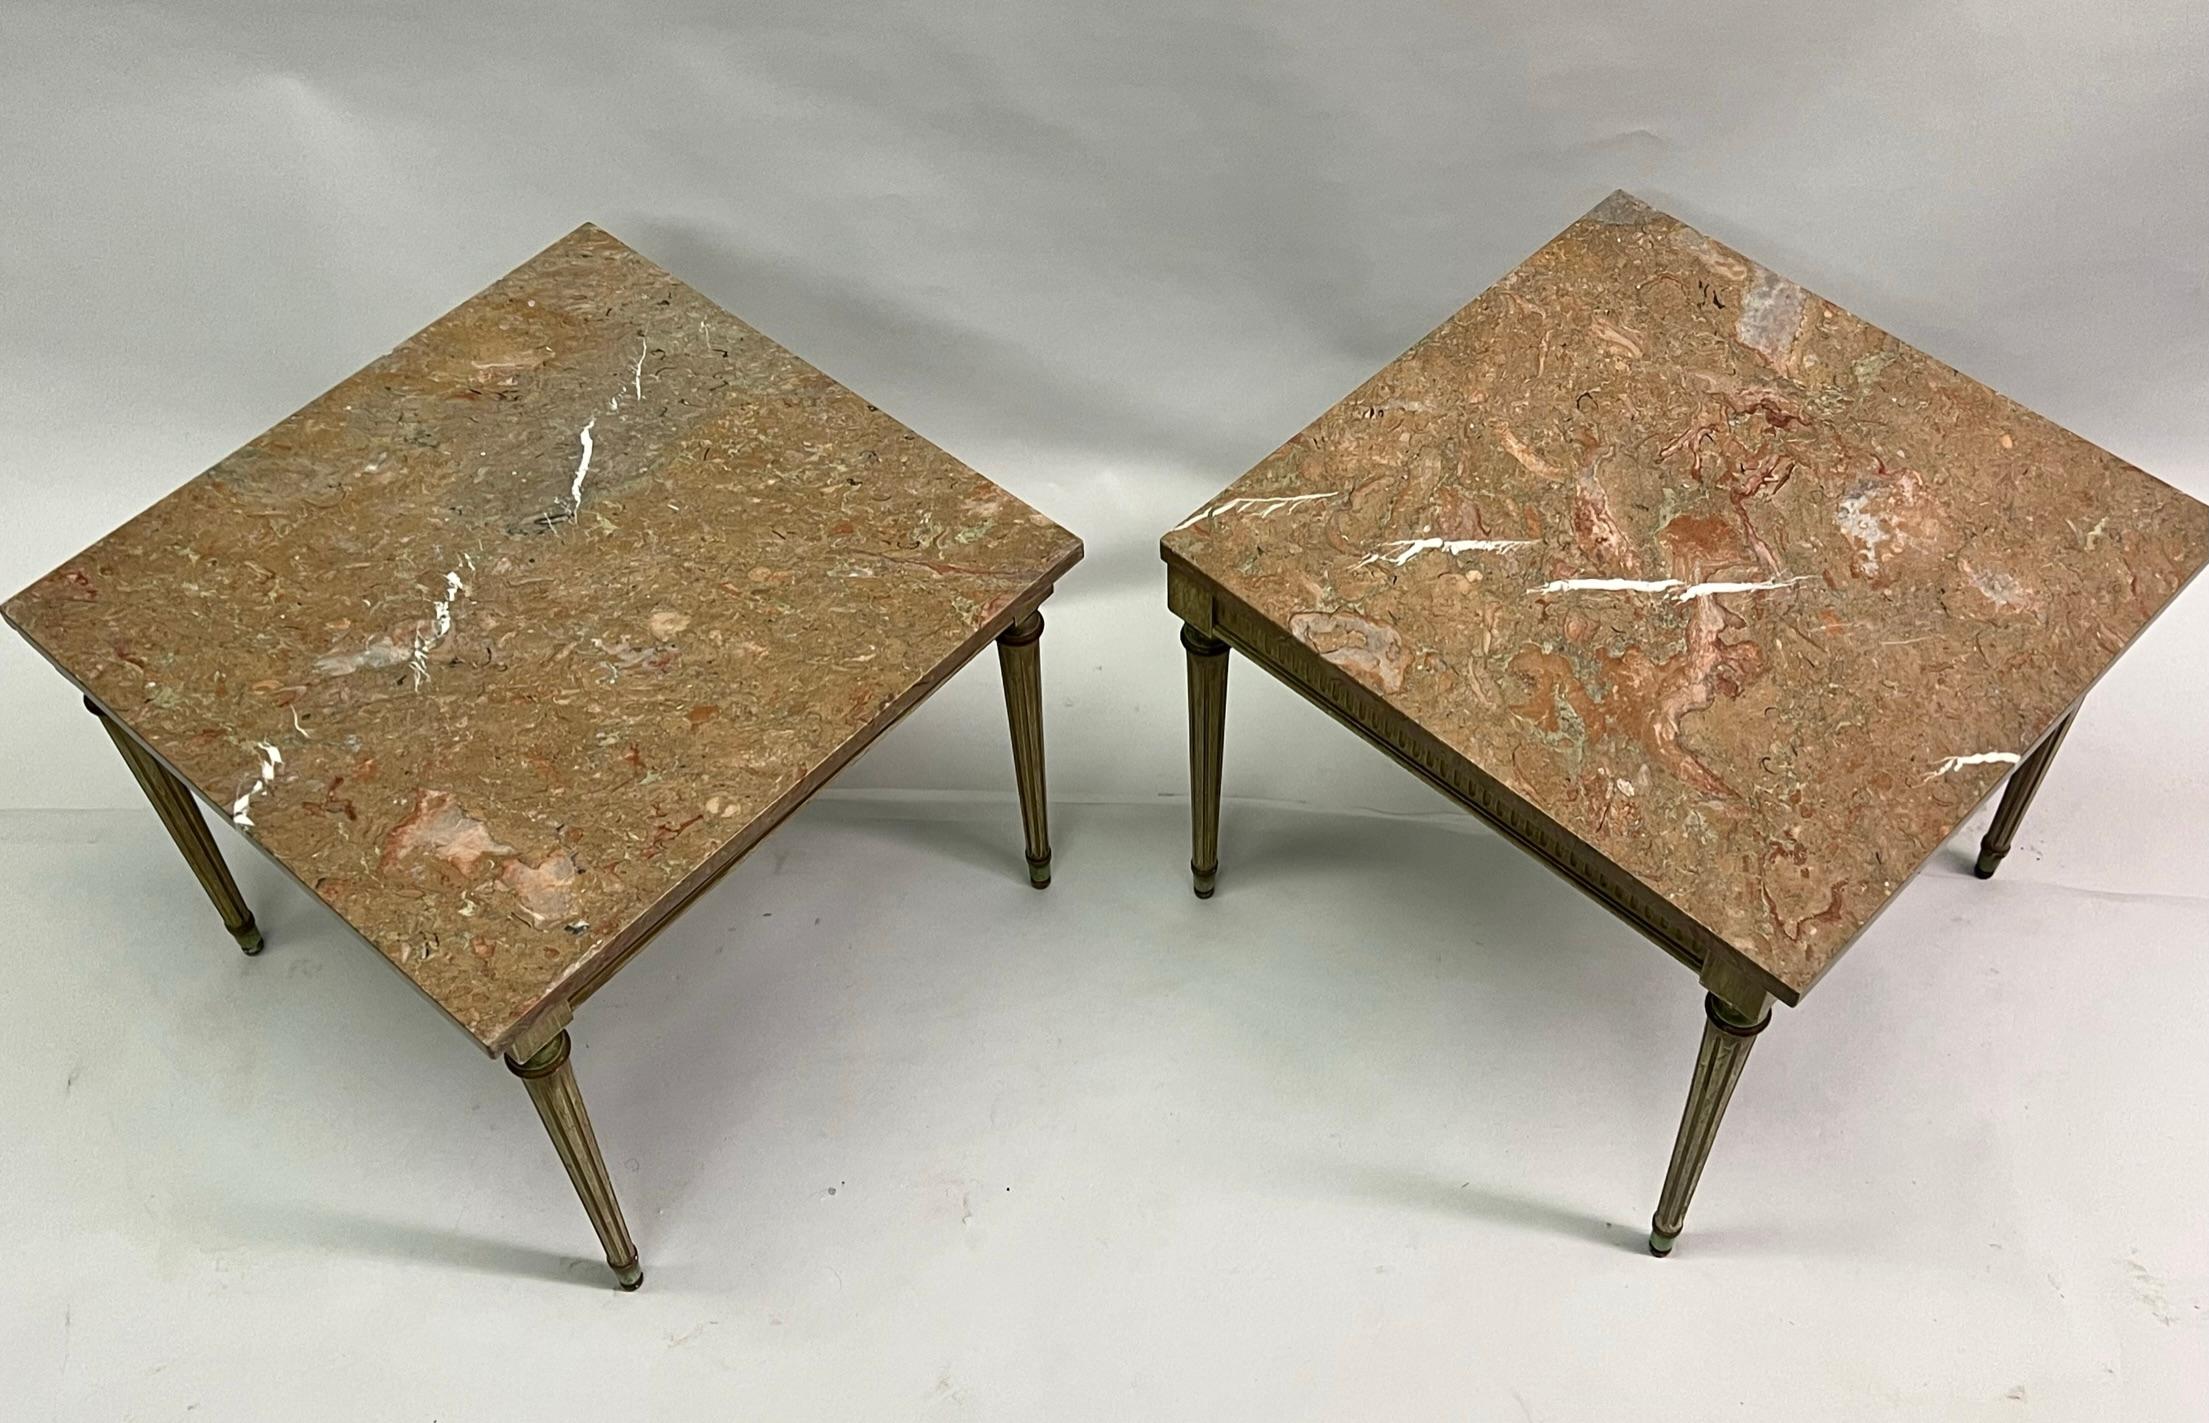 Elegant pair of French Mid-Century Modern neoclassical end or side tables in the Louis XVI style and are attributed to Maison Jansen. The pieces are composed of hand carved and hand painted wood frames and have complimentarily toned original marble